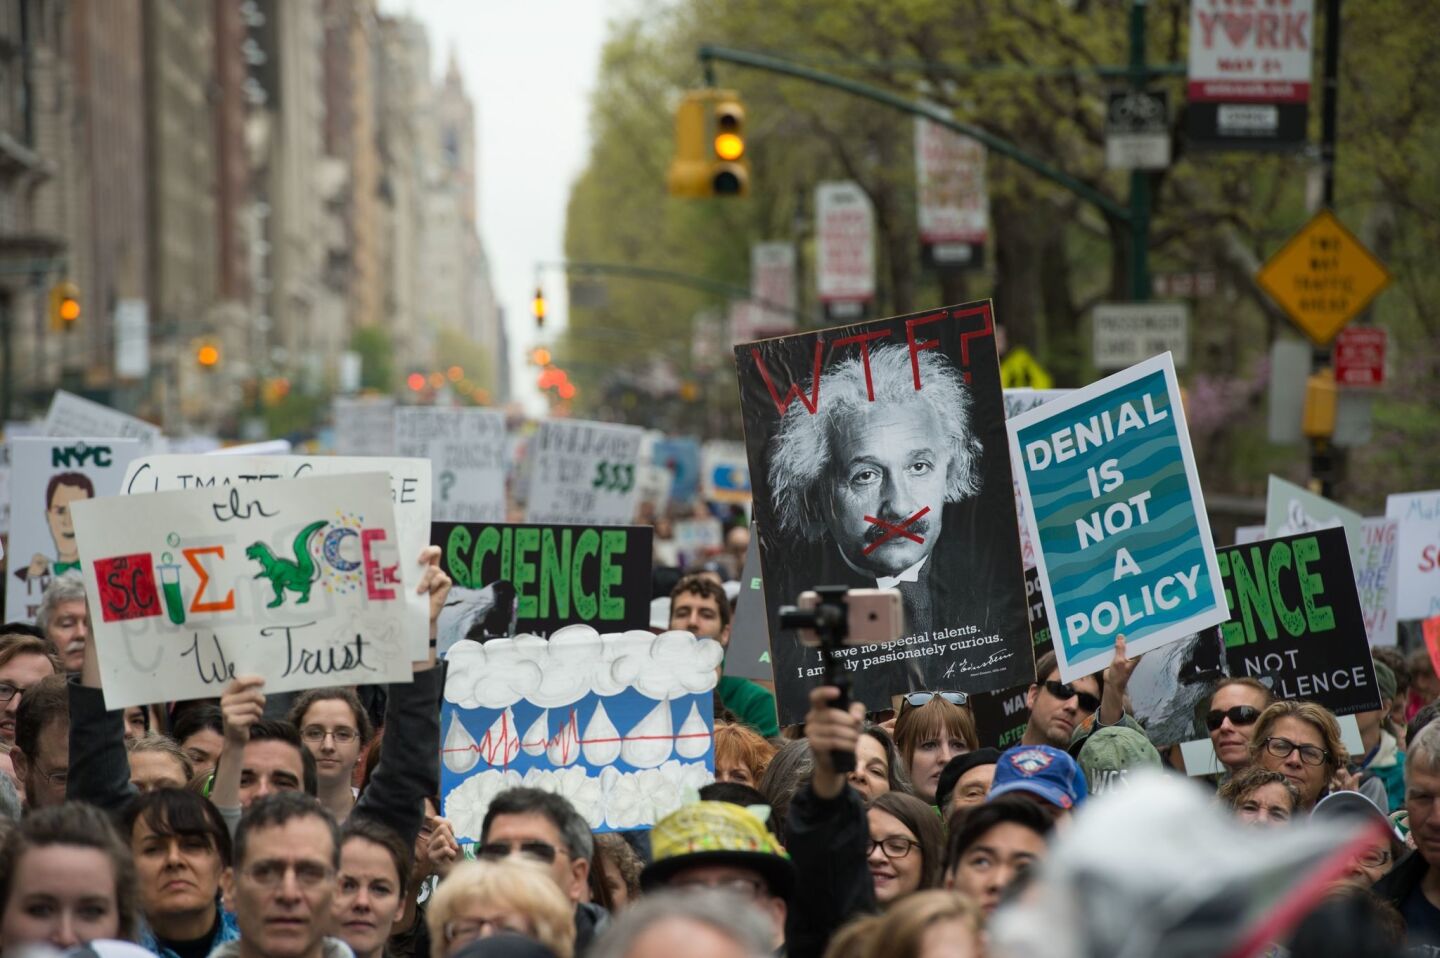 New York March for Science participants rally on Central Park West.